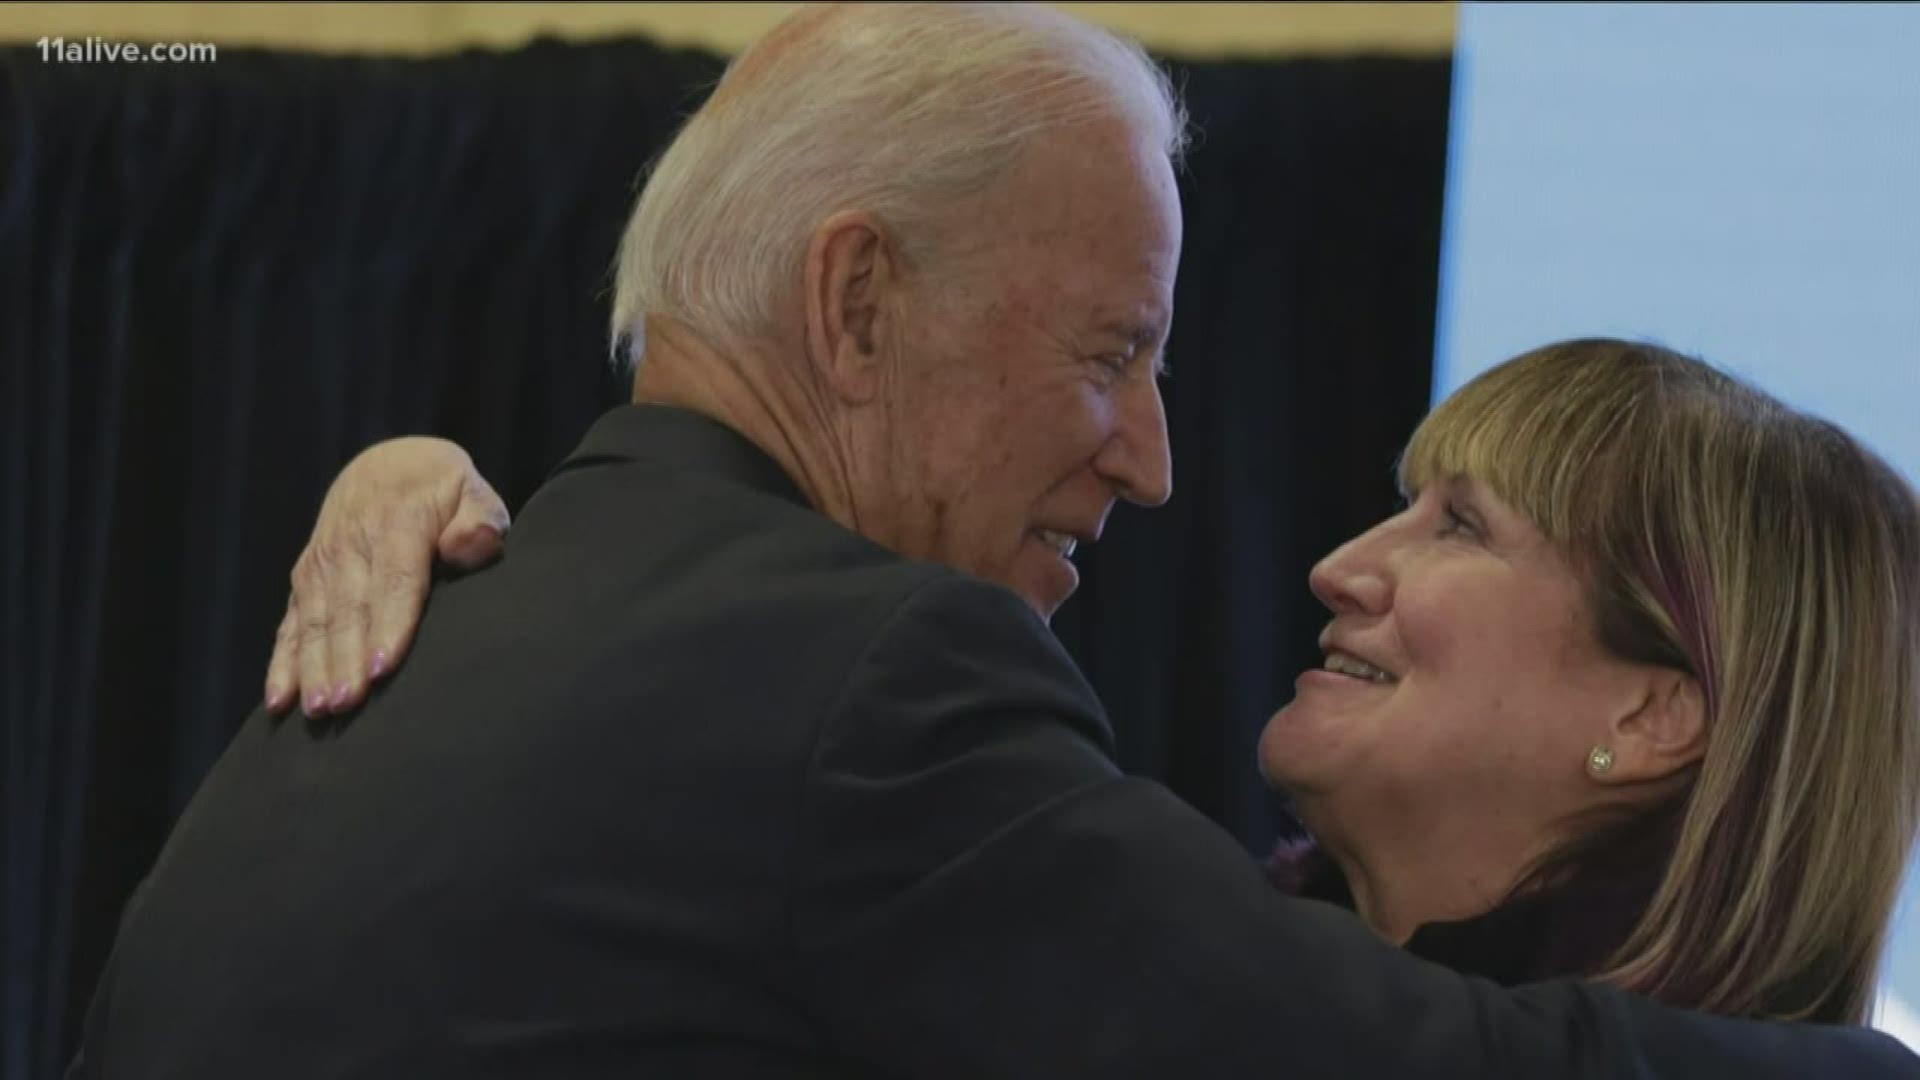 The former Vice President came under fire for allegations of inappropriate touching. The Atlanta mayor tweeted her support for Biden.